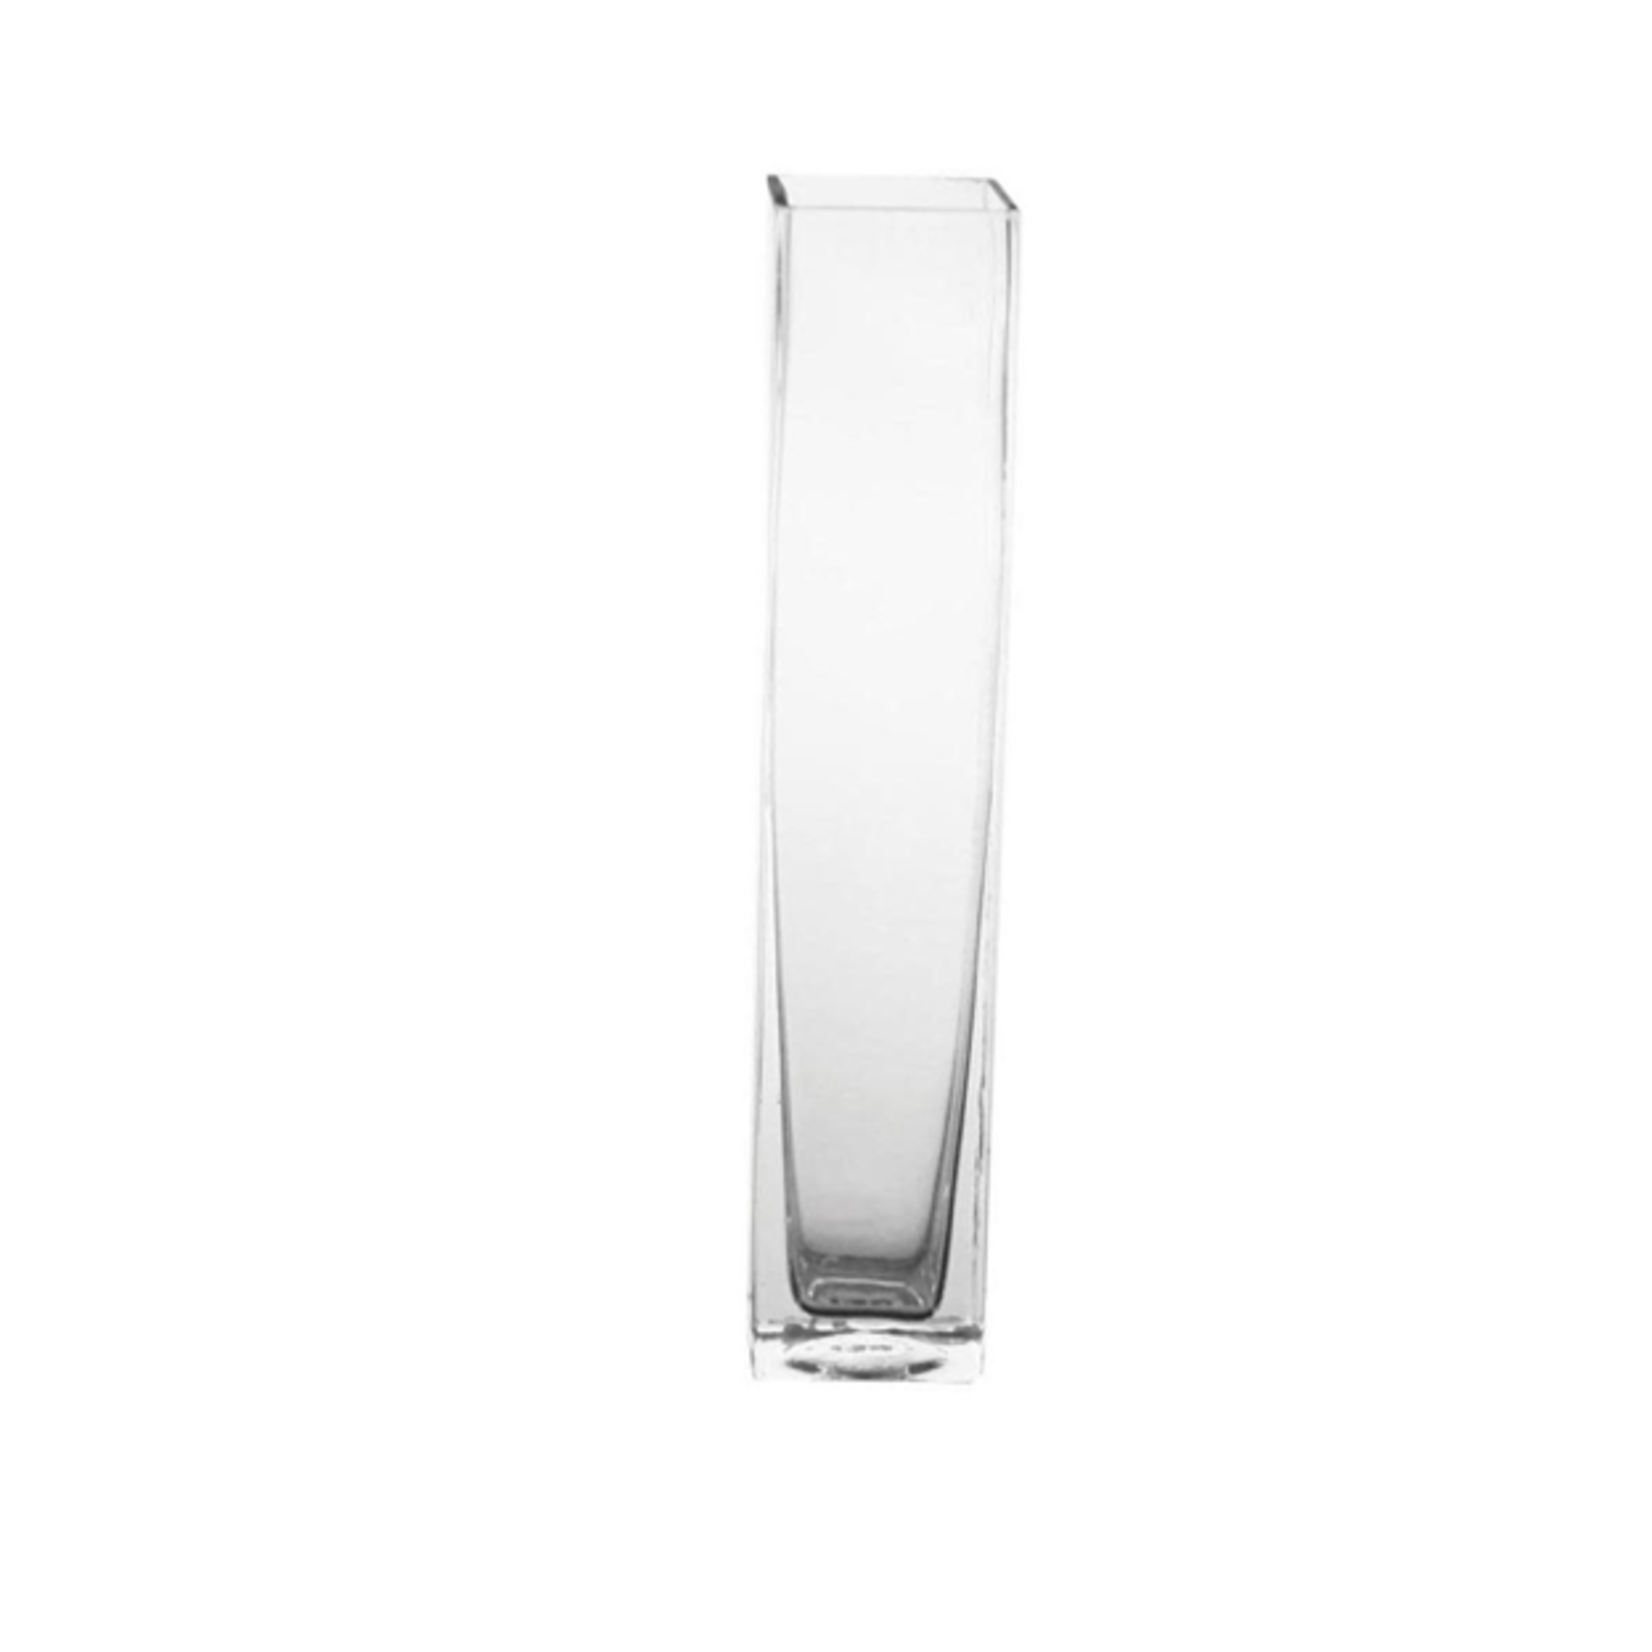 10"H X 2" X 2" CLEAR SQUARE GLASS BUD VASE